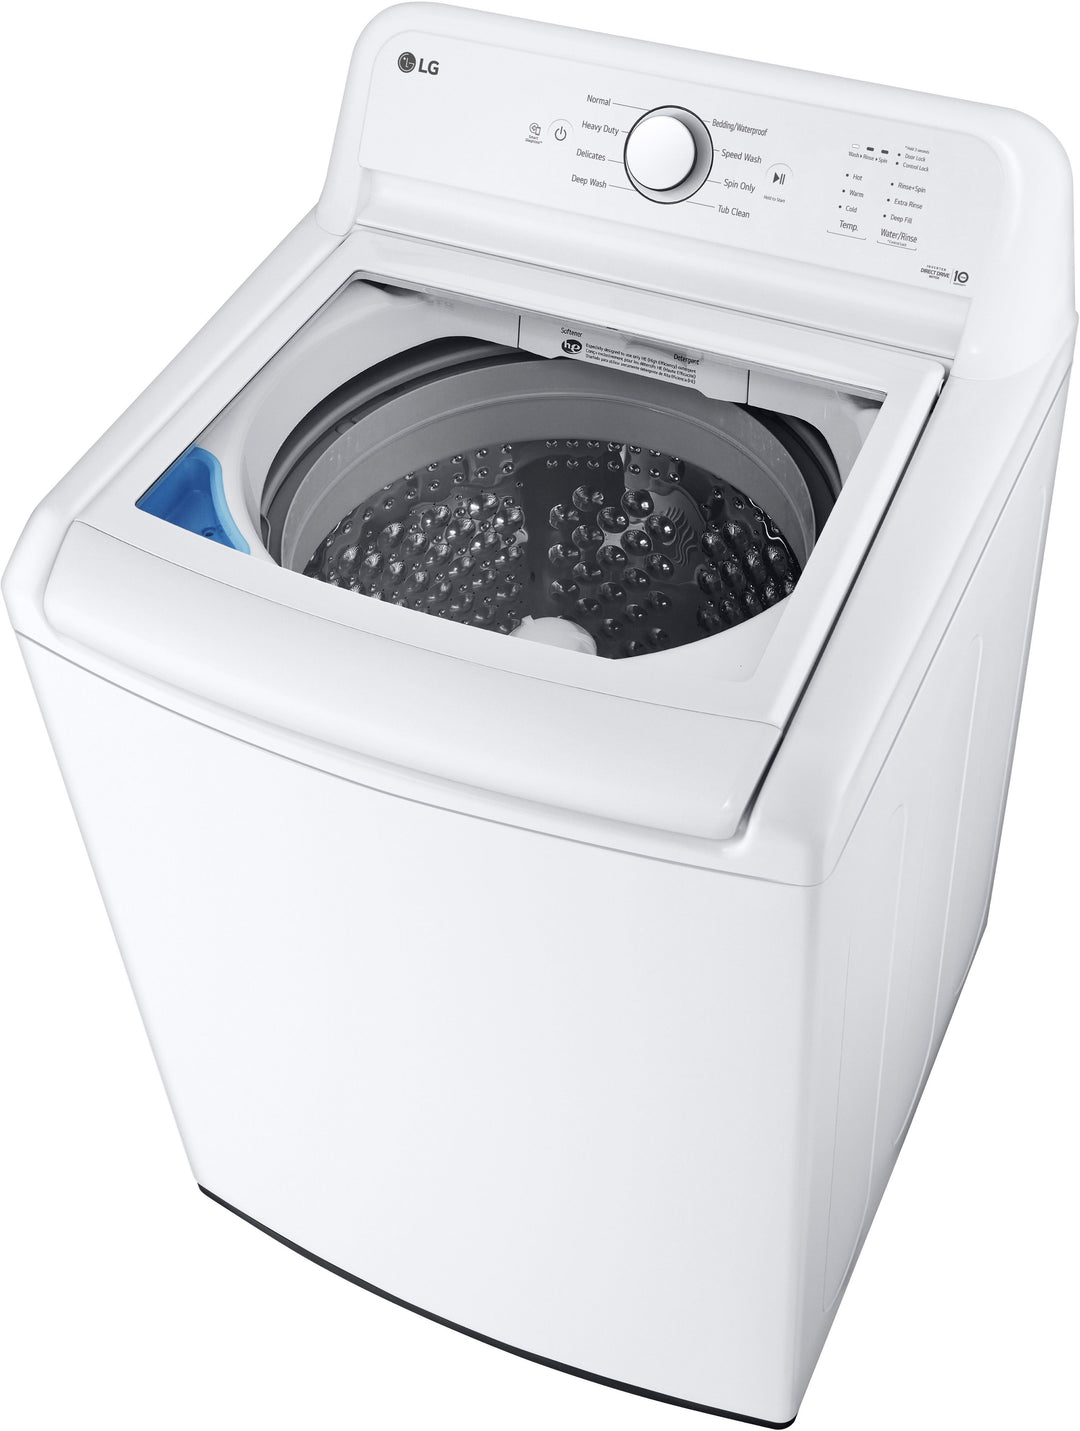 LG - 4.1 Cu. Ft. Smart Top Load Washer with SlamProof Glass Lid - White_2